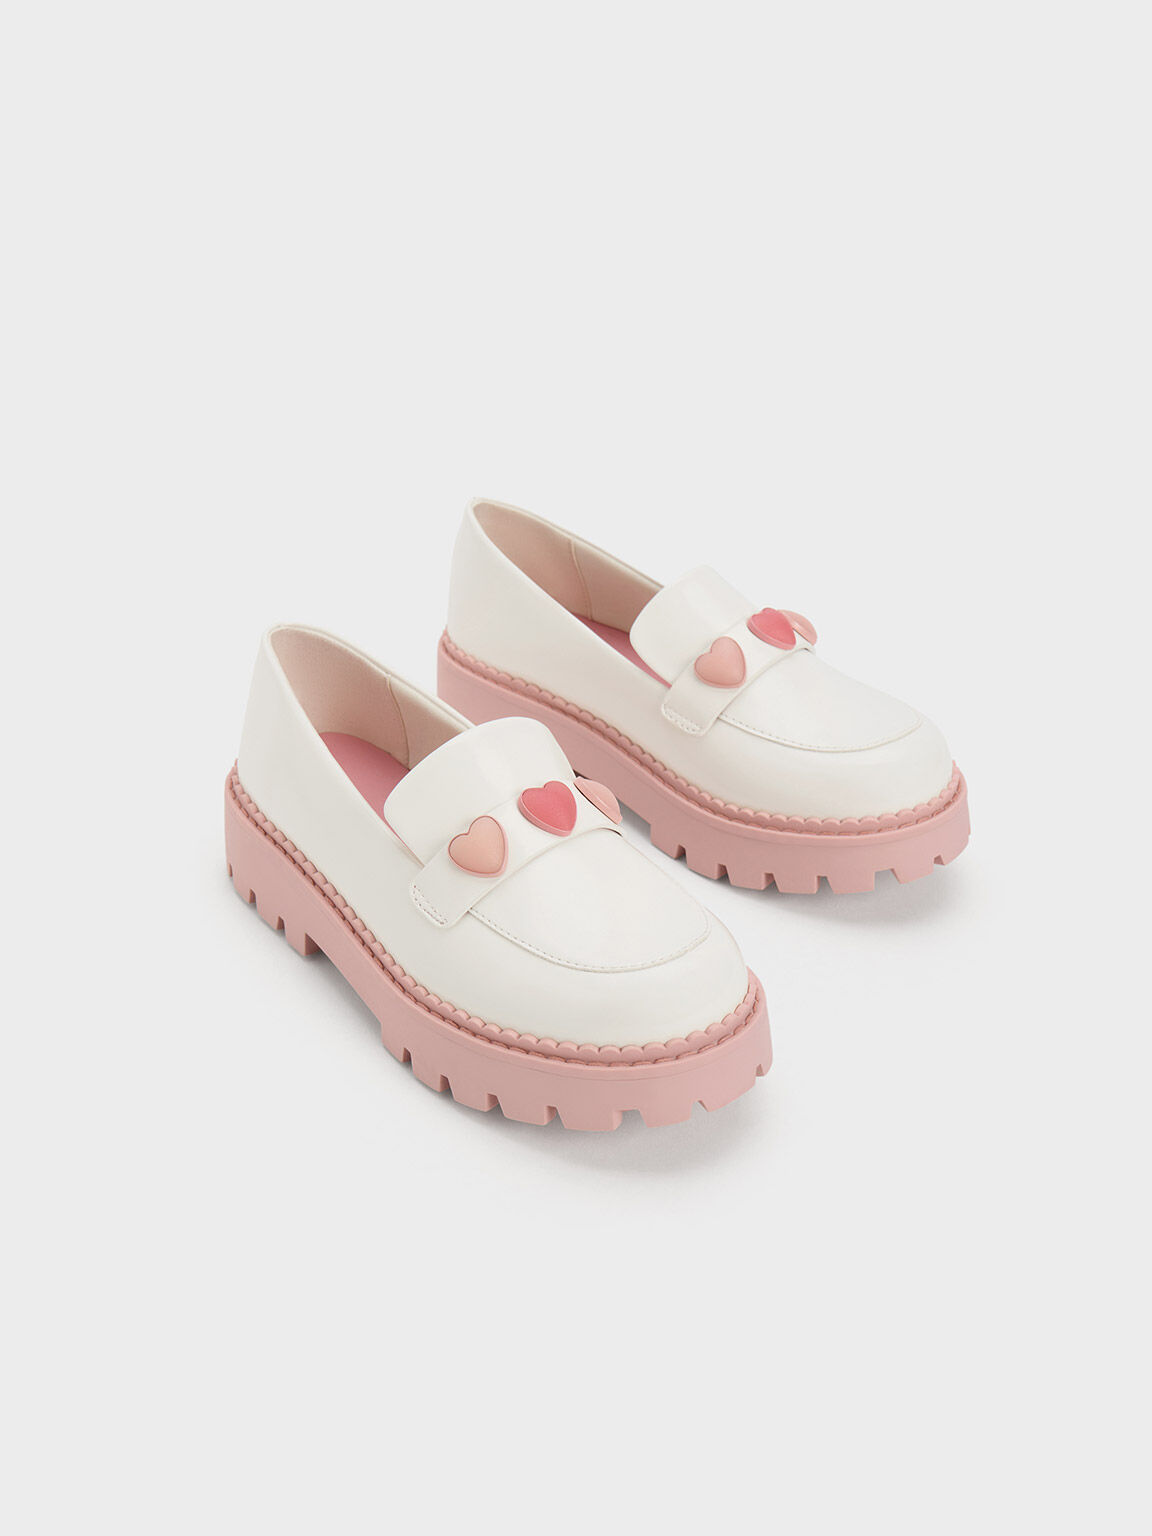 Girls' Heart-Motif Penny Loafers, White, hi-res